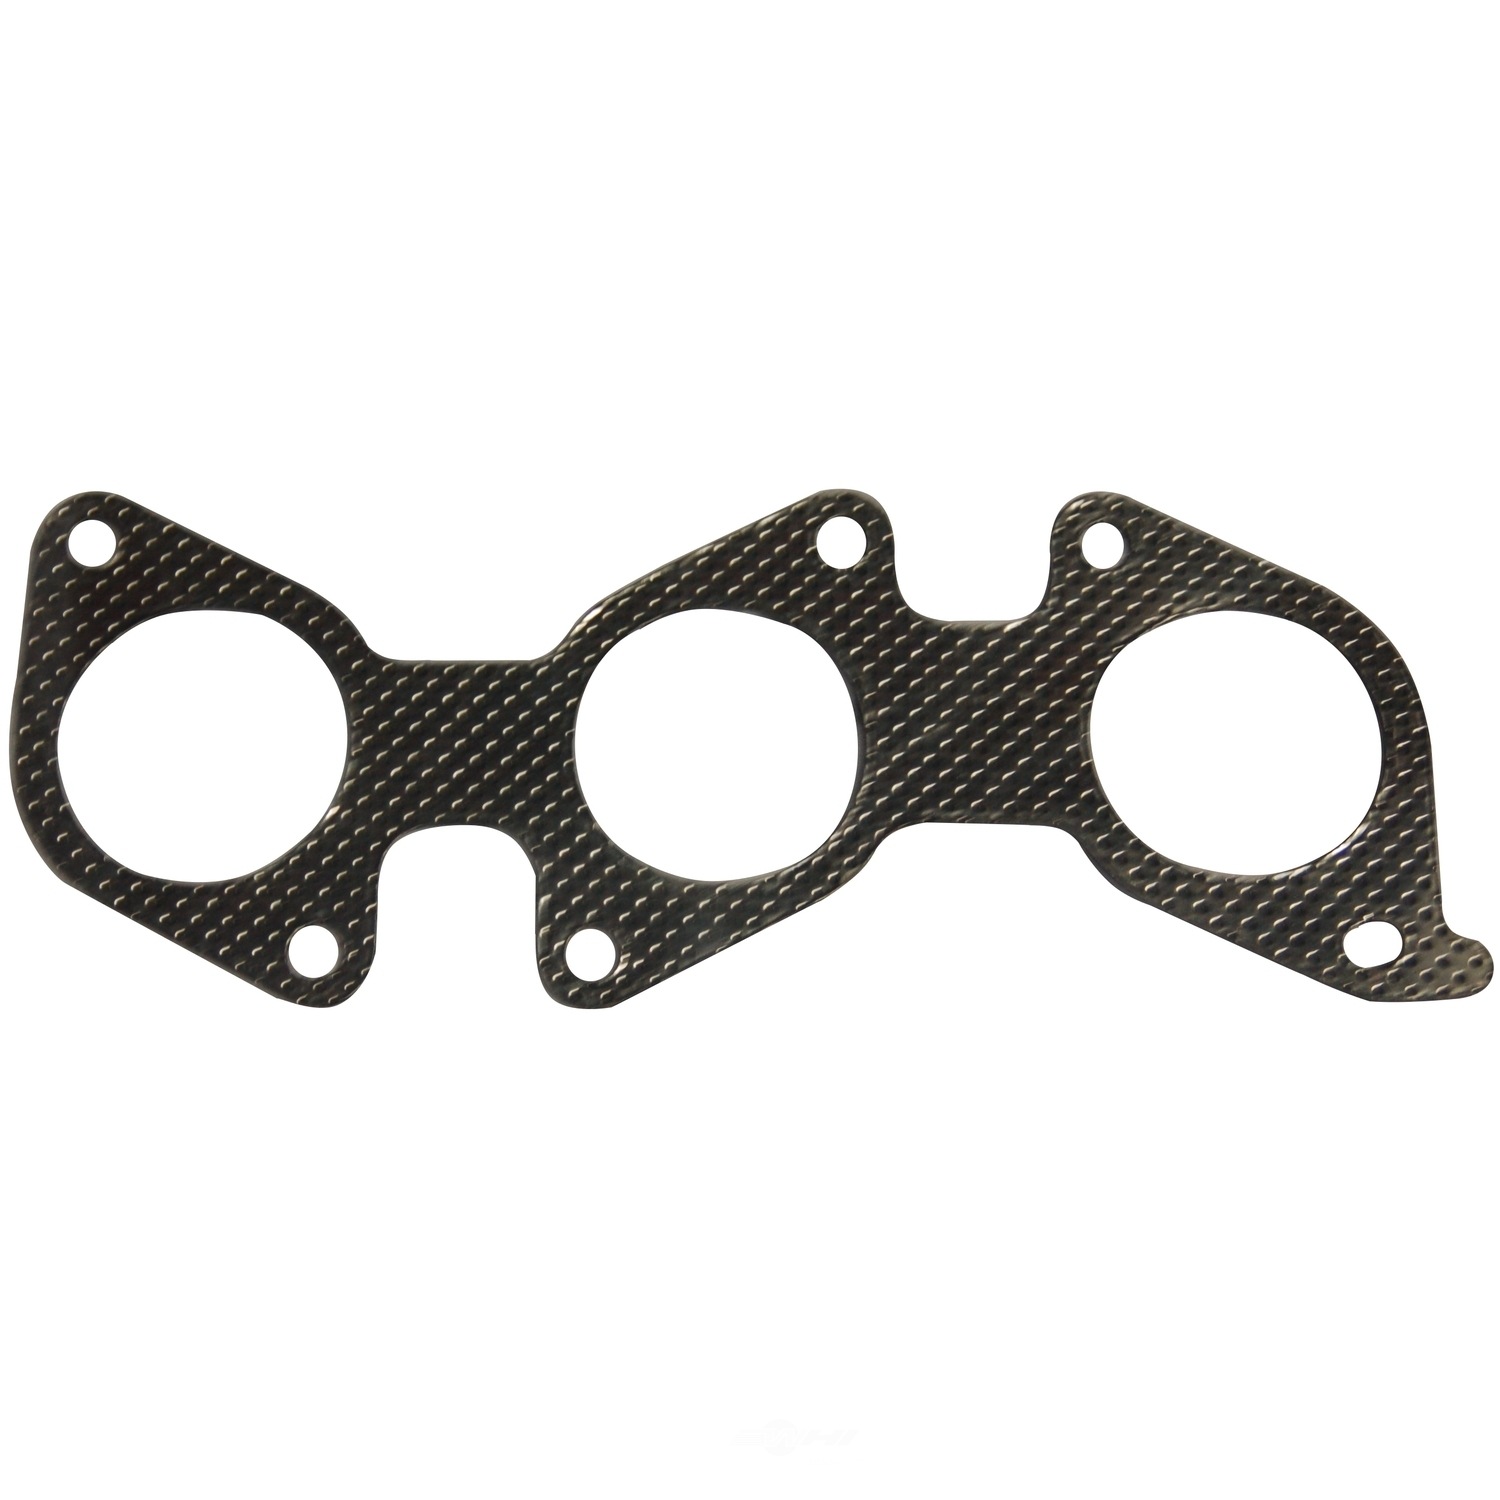 BREXHAUST 49 STATE CONVERTERS - Exhaust Pipe Flange Gasket (Left) - BSF 256-1156